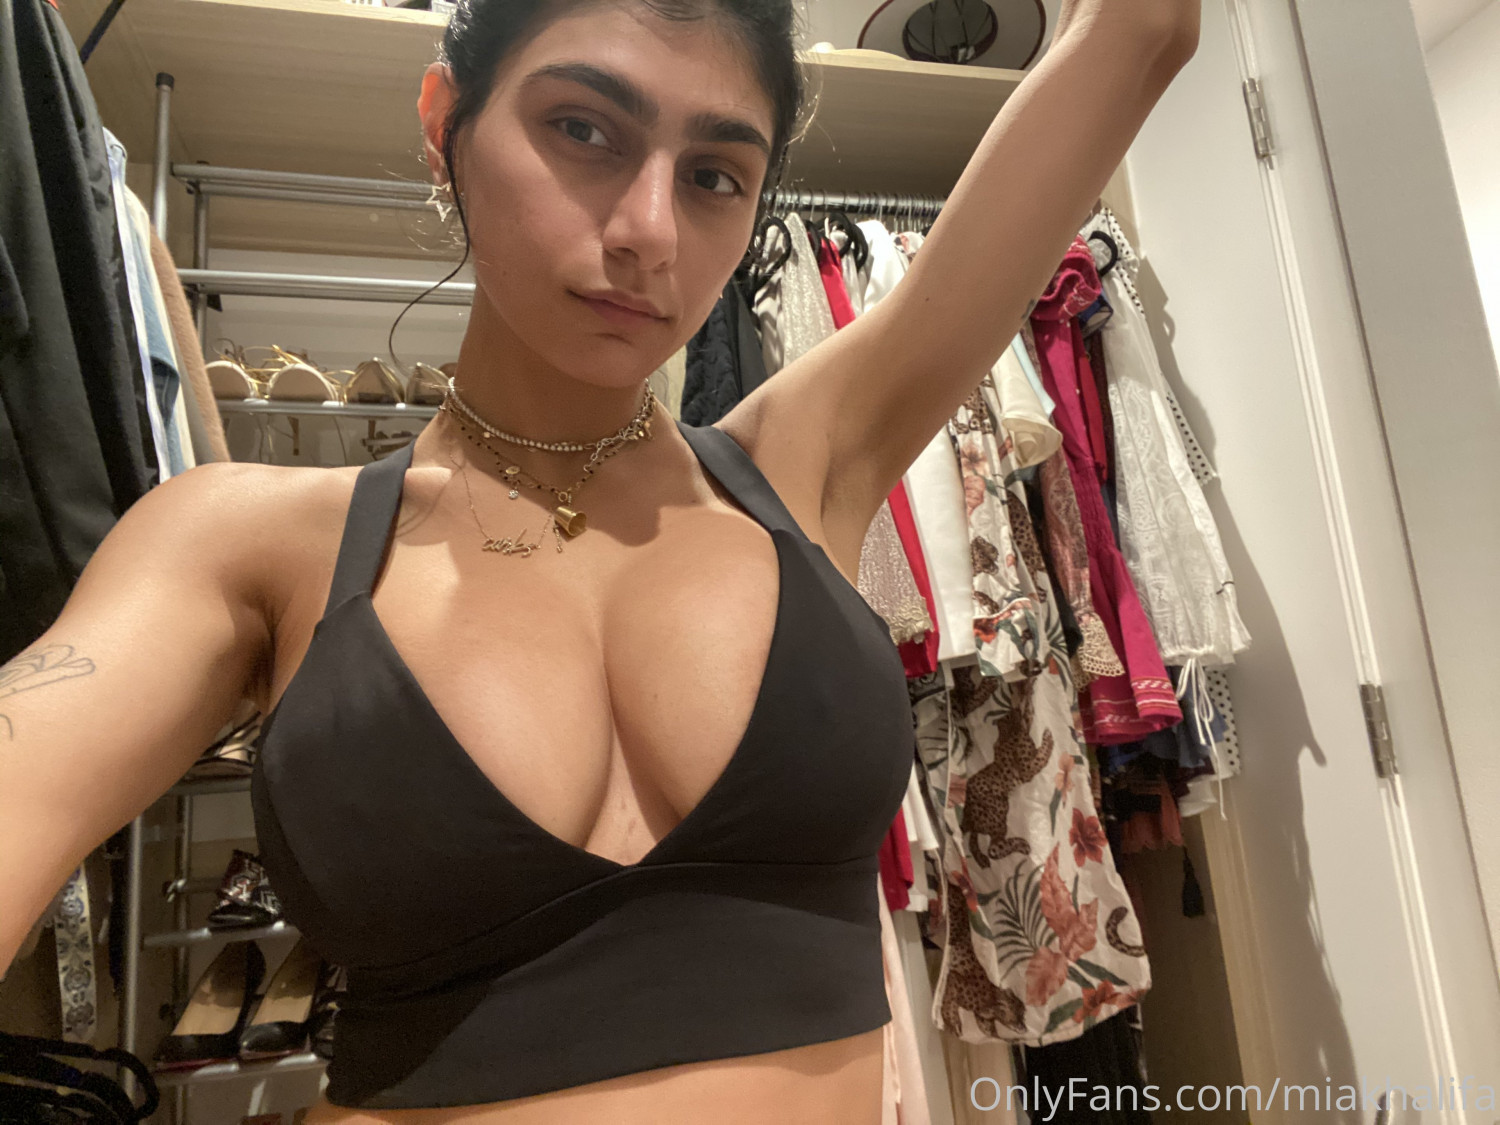 Private video Mia Khalifa Onlyfans Nude Videos